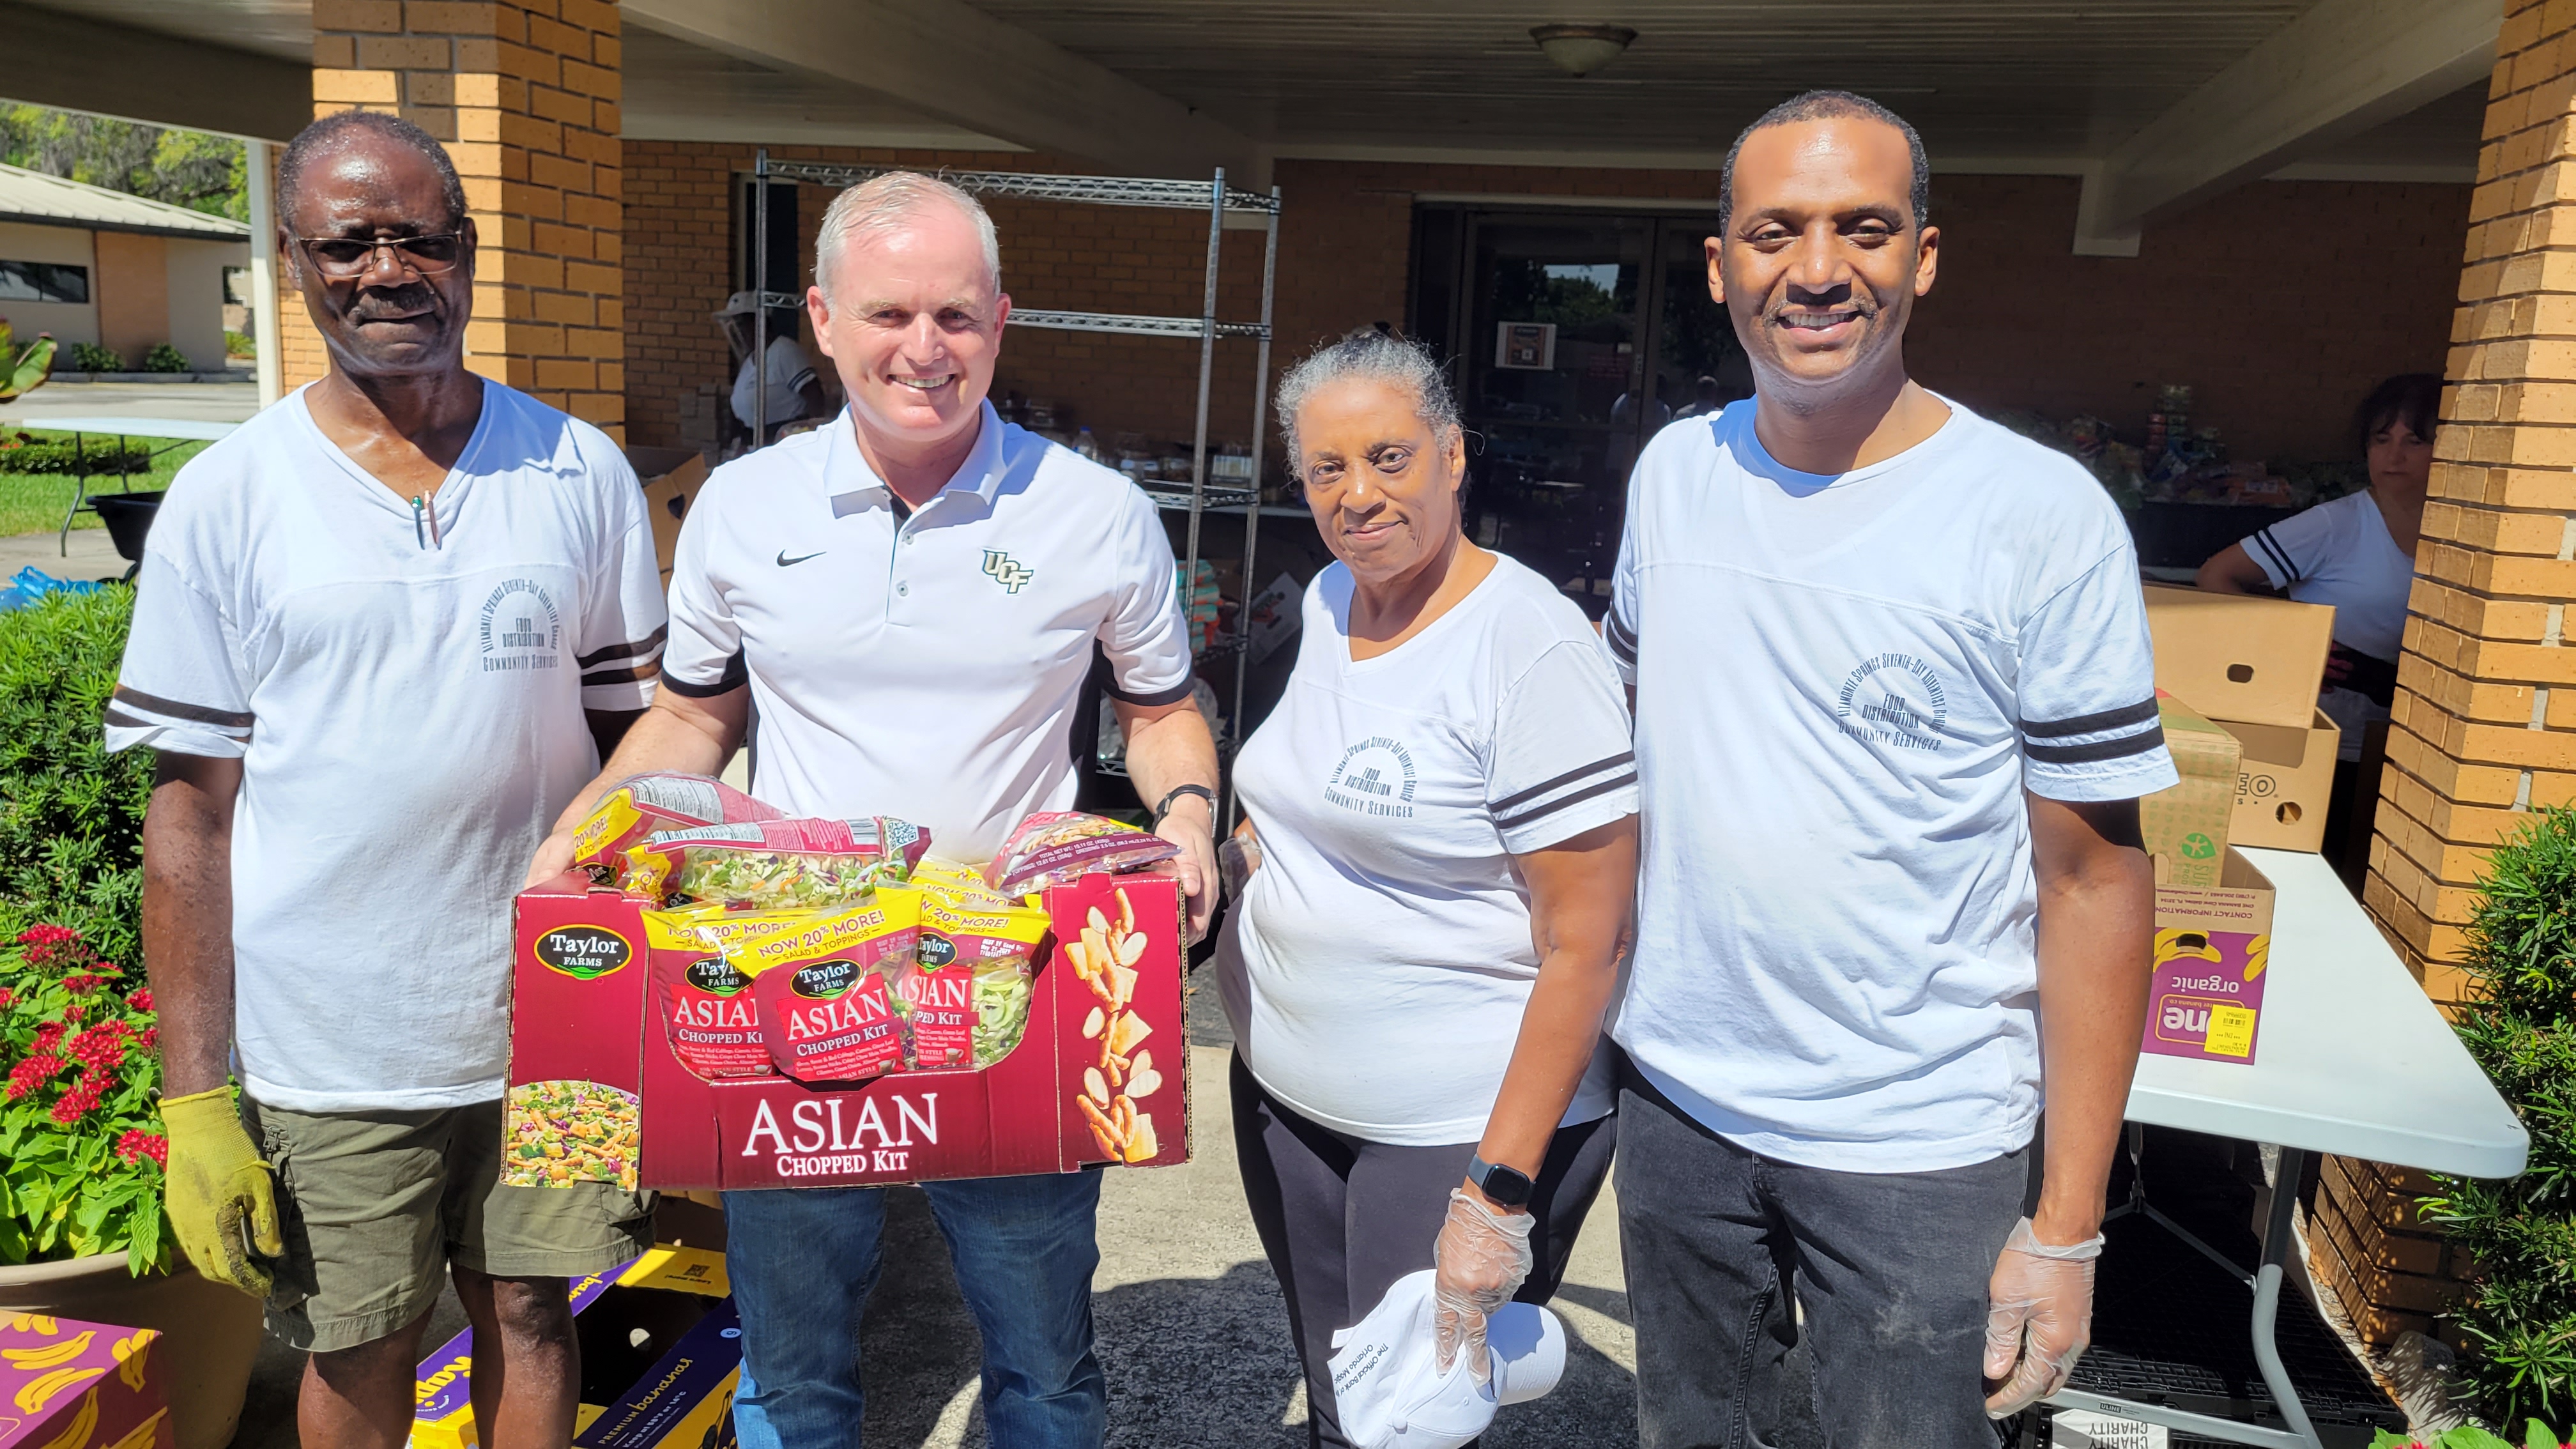 A group of people stand together smiling - black man, white man holding a box of Asian chopped kit, a black woman and black man